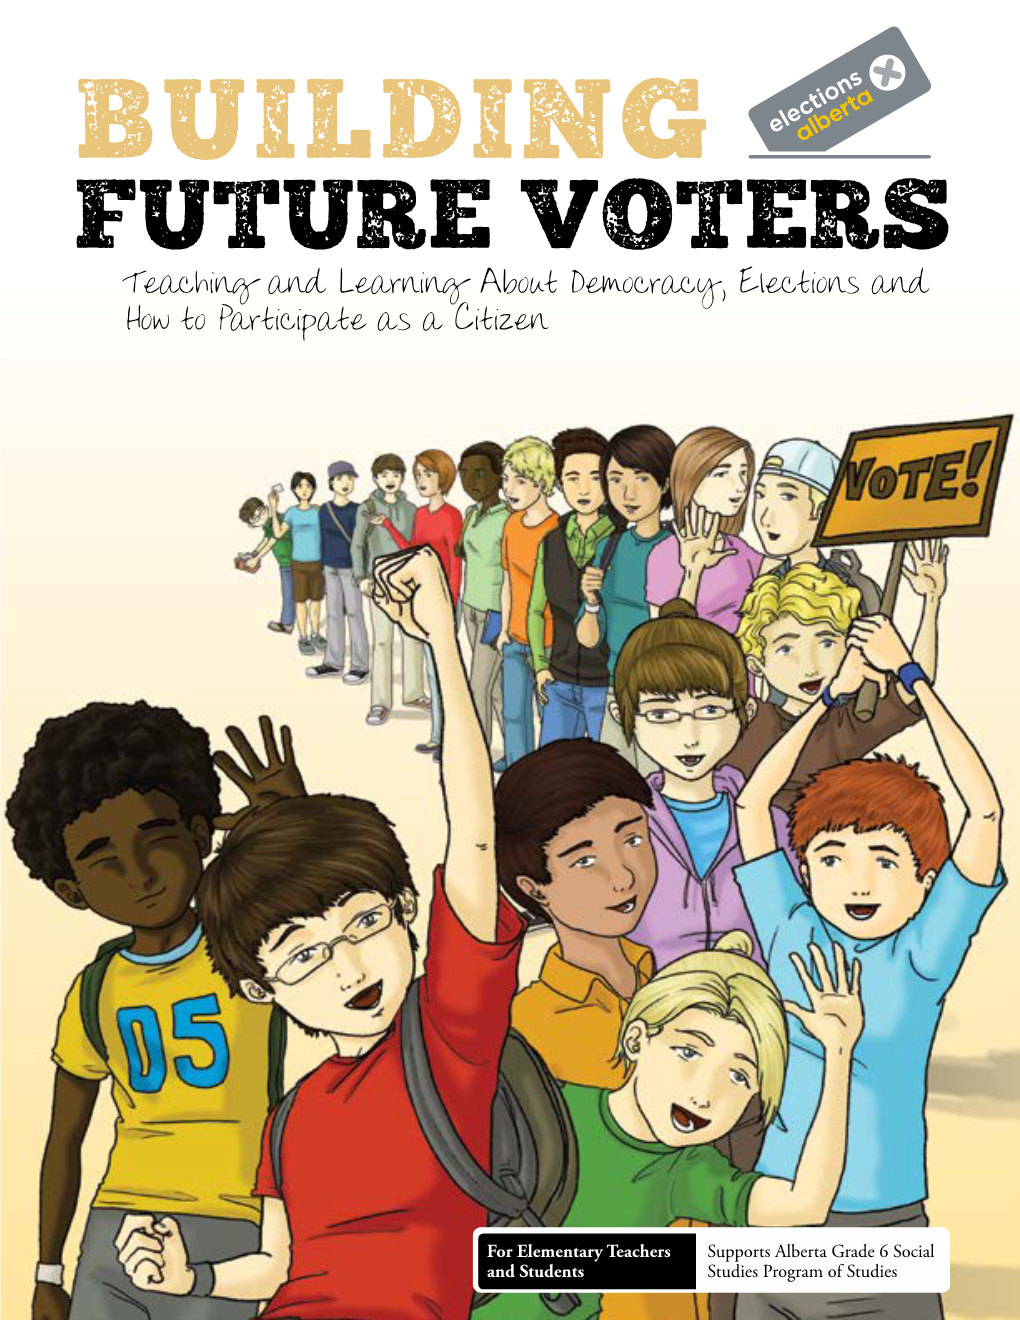 BUILDING FUTURE VOTERS Teaching and Learning About Democracy, Elections and How to Participate As a Citizen